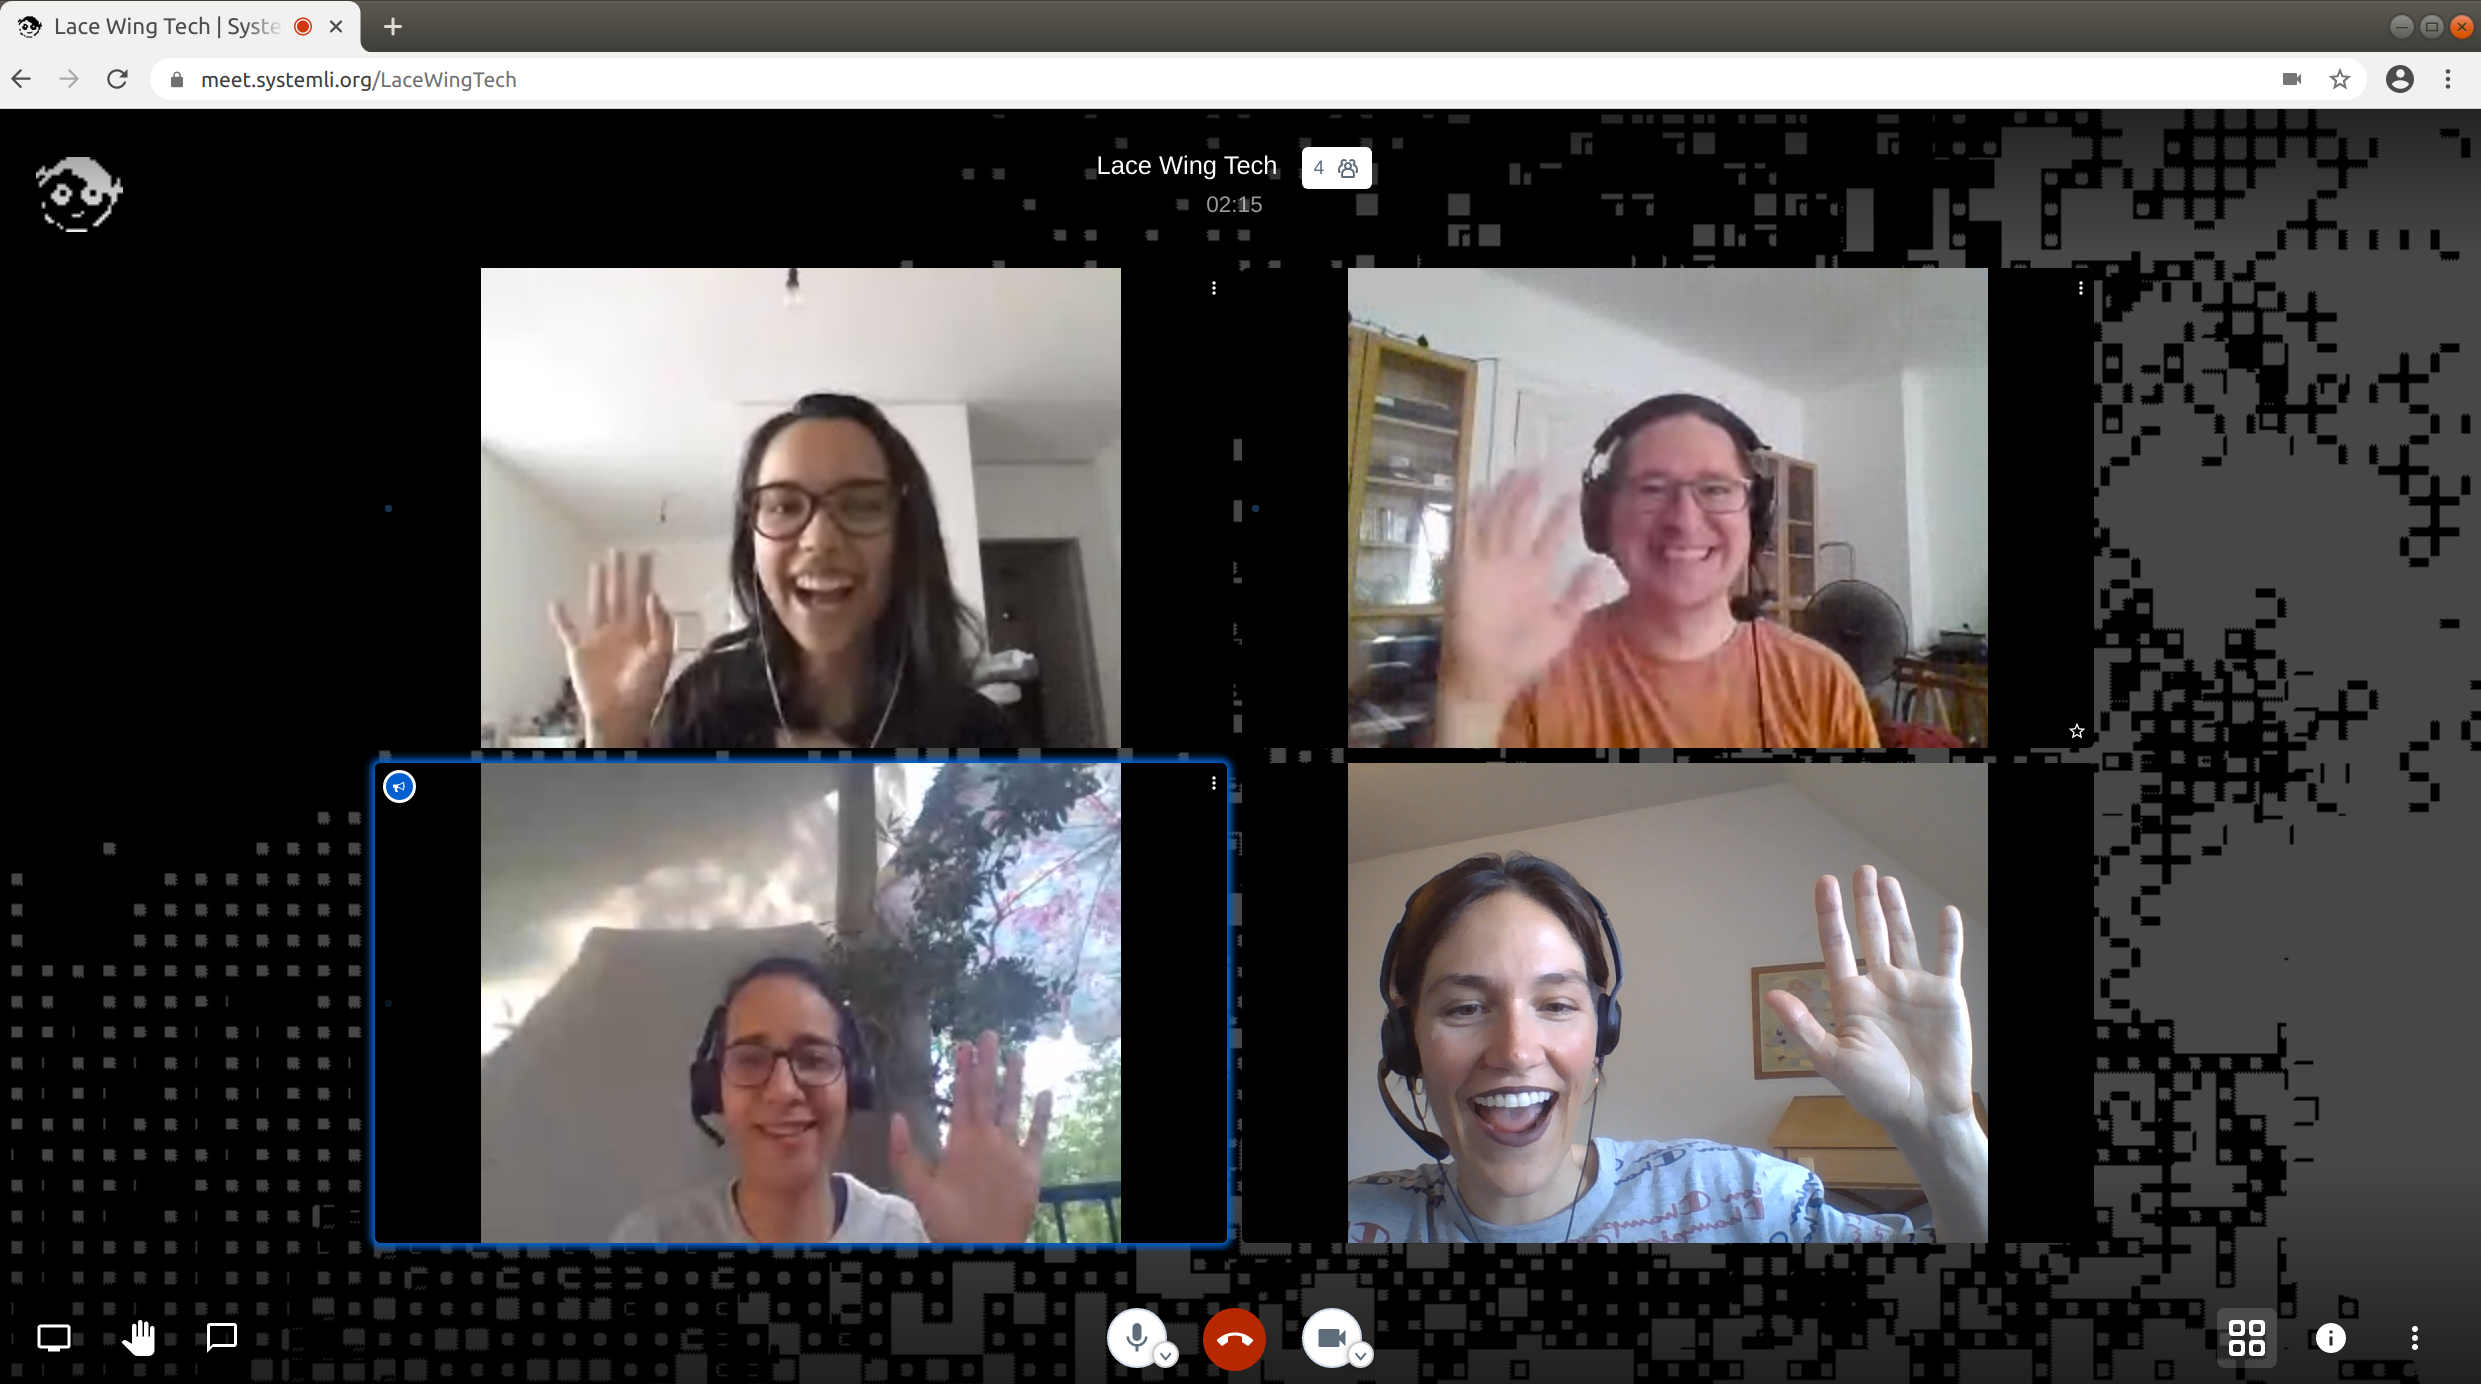 Four people wave and smile in a video call.